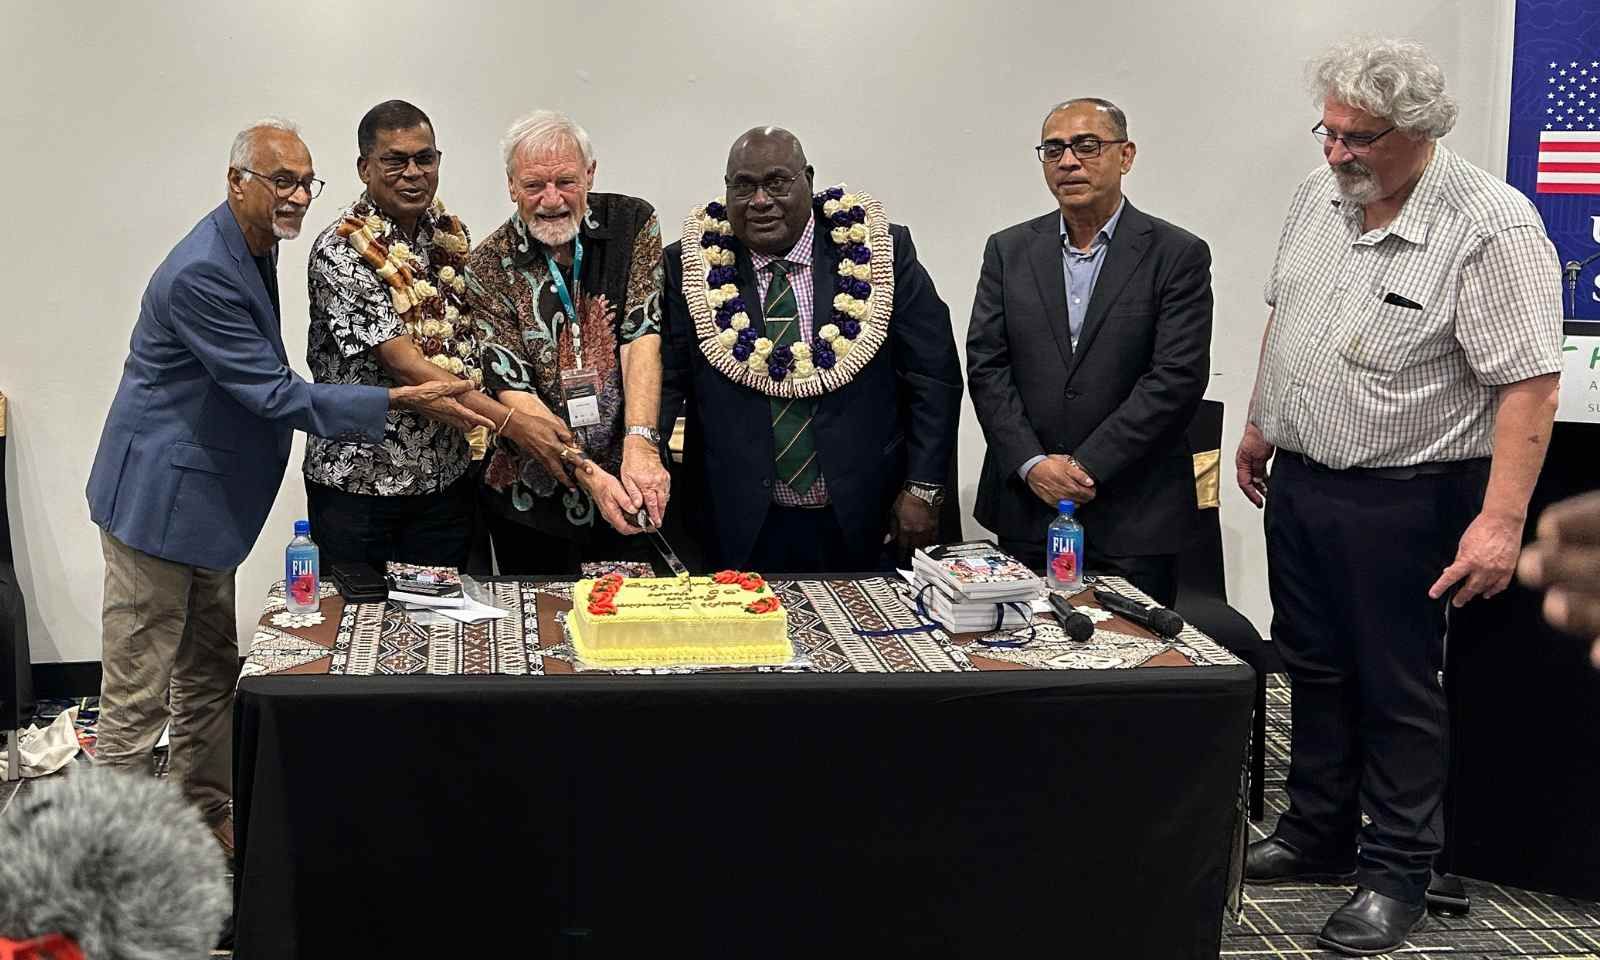 The launch of the 30th anniversary edition of Pacific Journalist Review